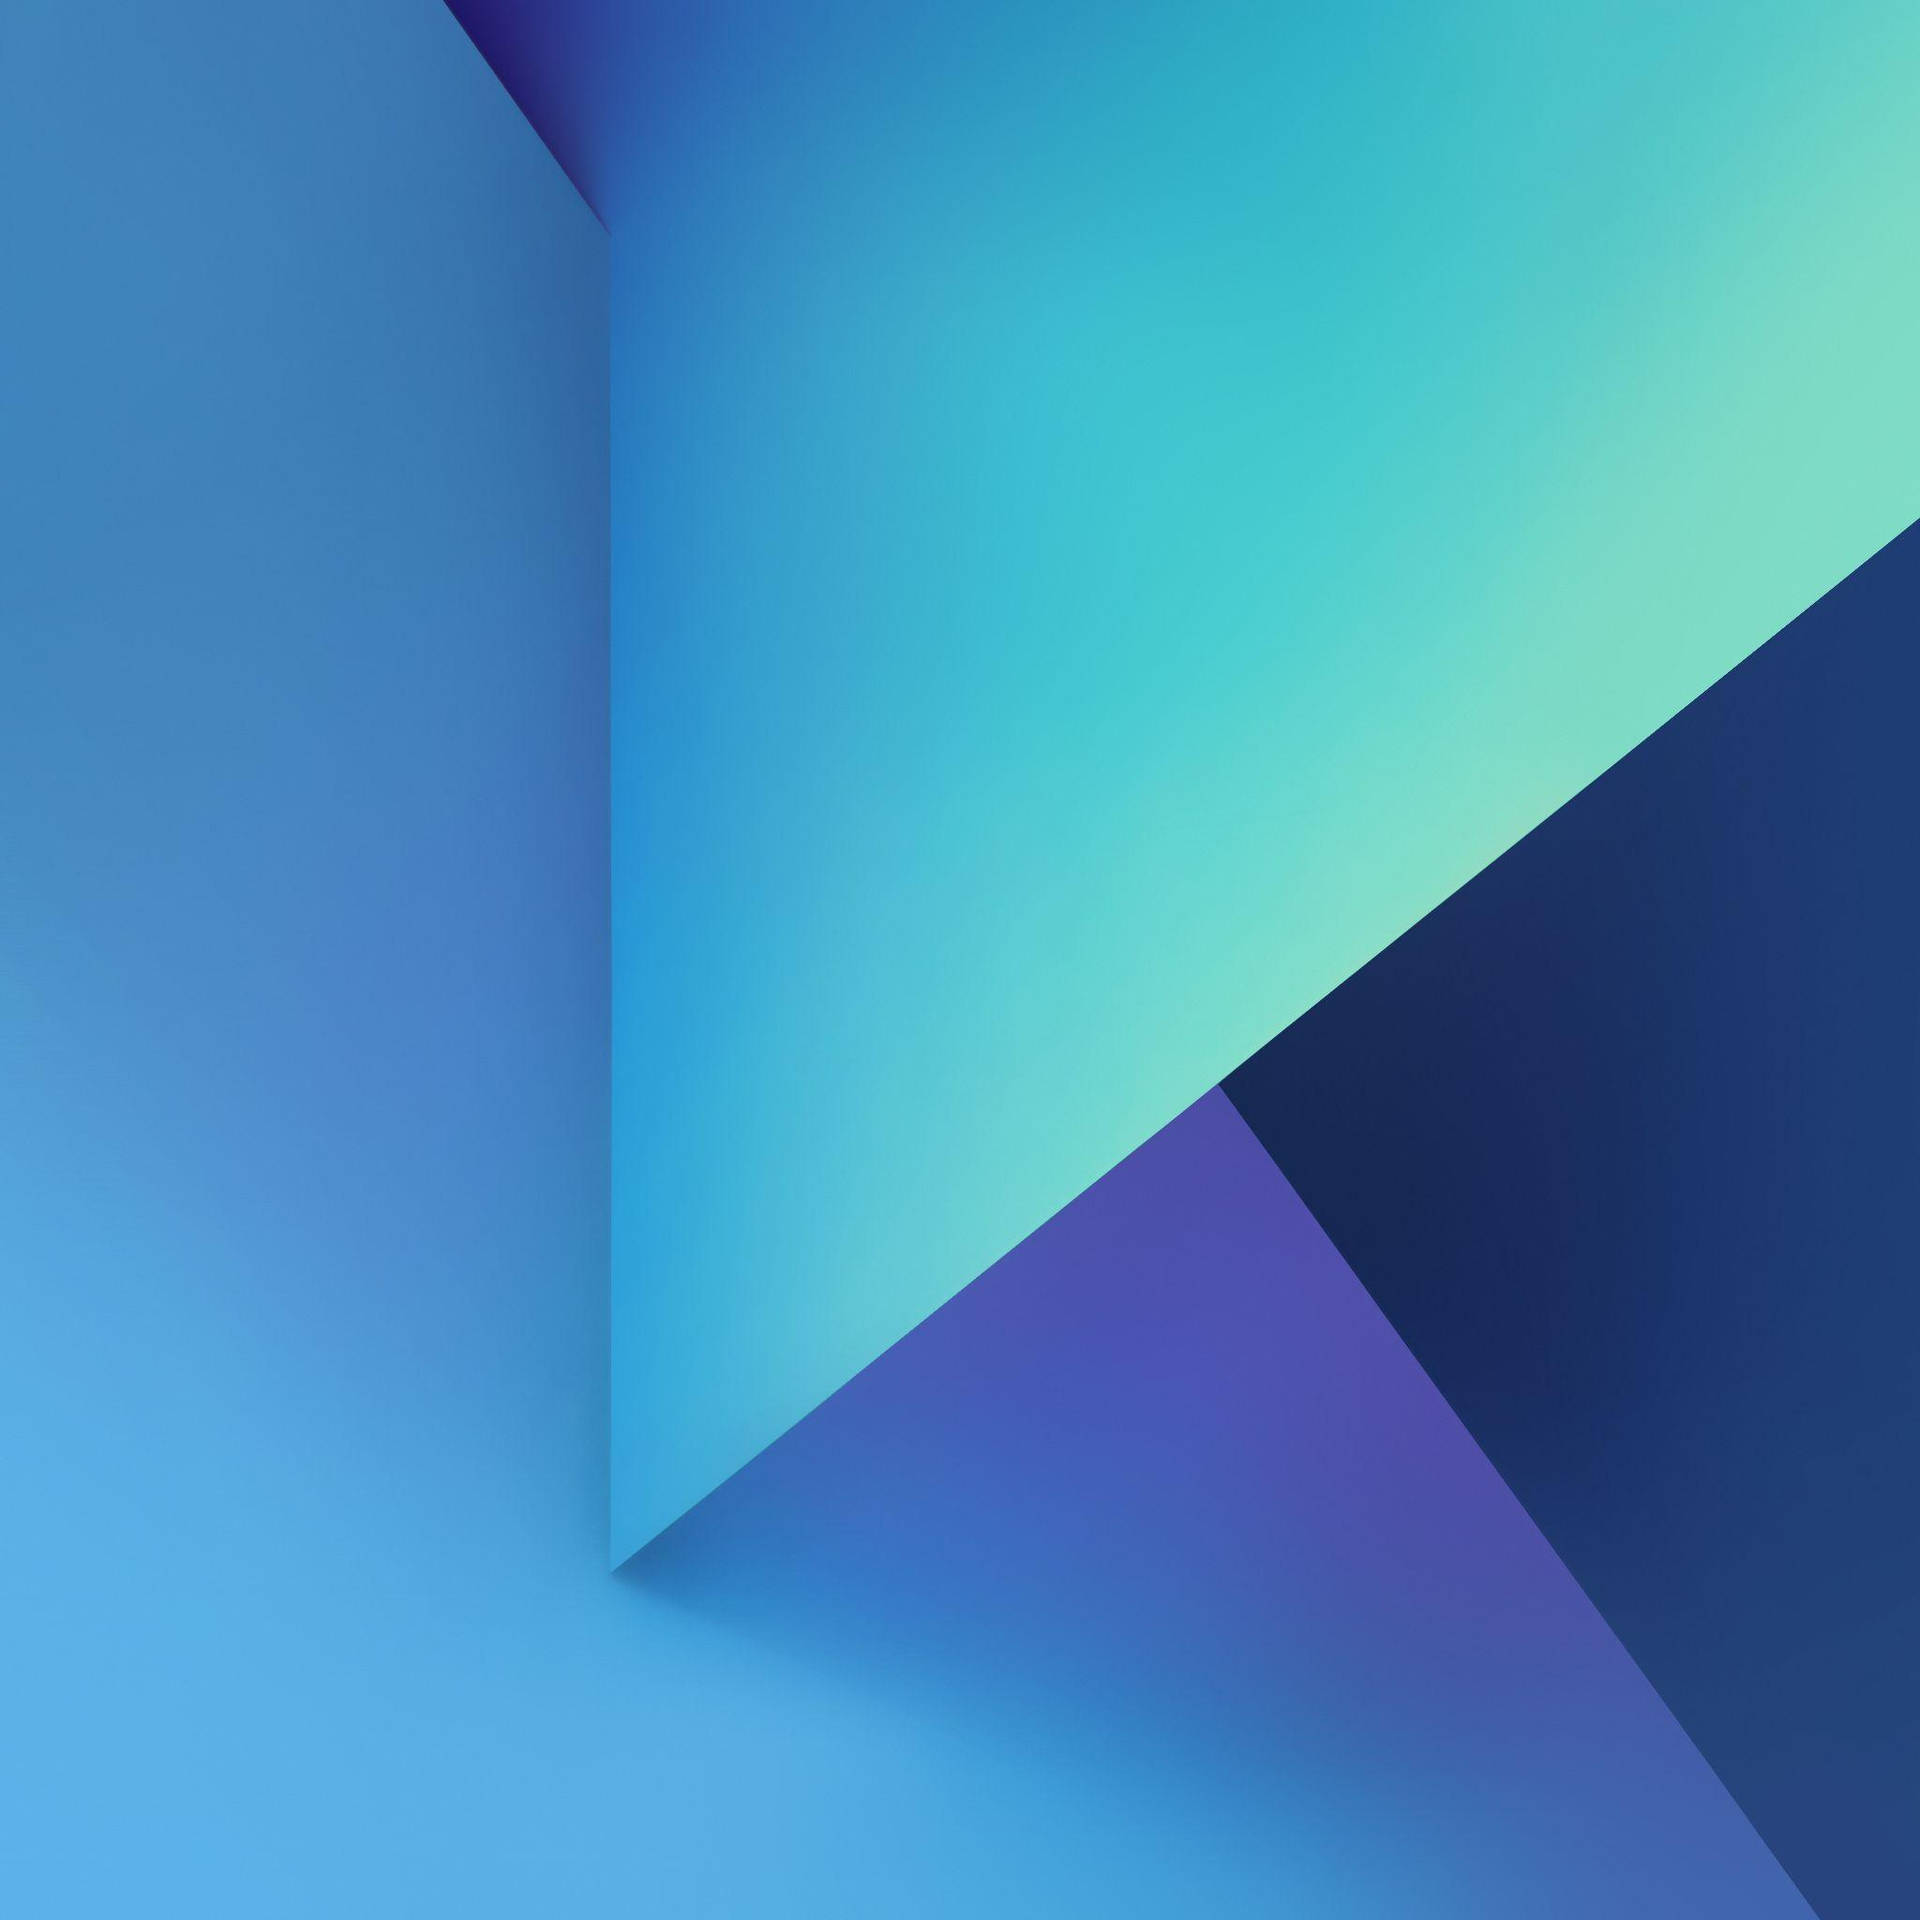 Iridescent Blue Shapes Samsung Galaxy Tablet Background